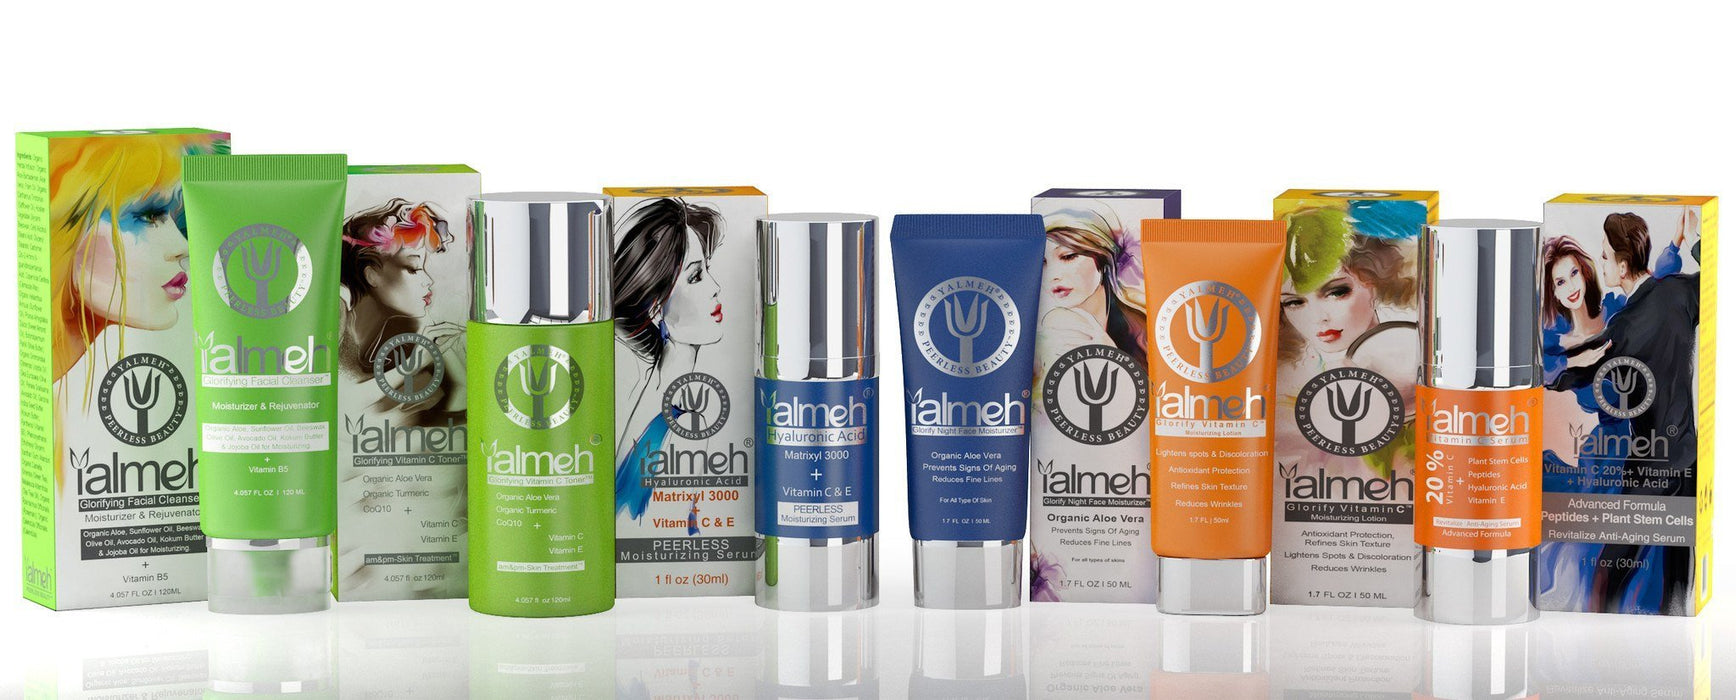 Yalmeh® Bio-Super Youth® AM&PM™ (Complete Collection For Normal Skin) - Yalmeh Naturals 